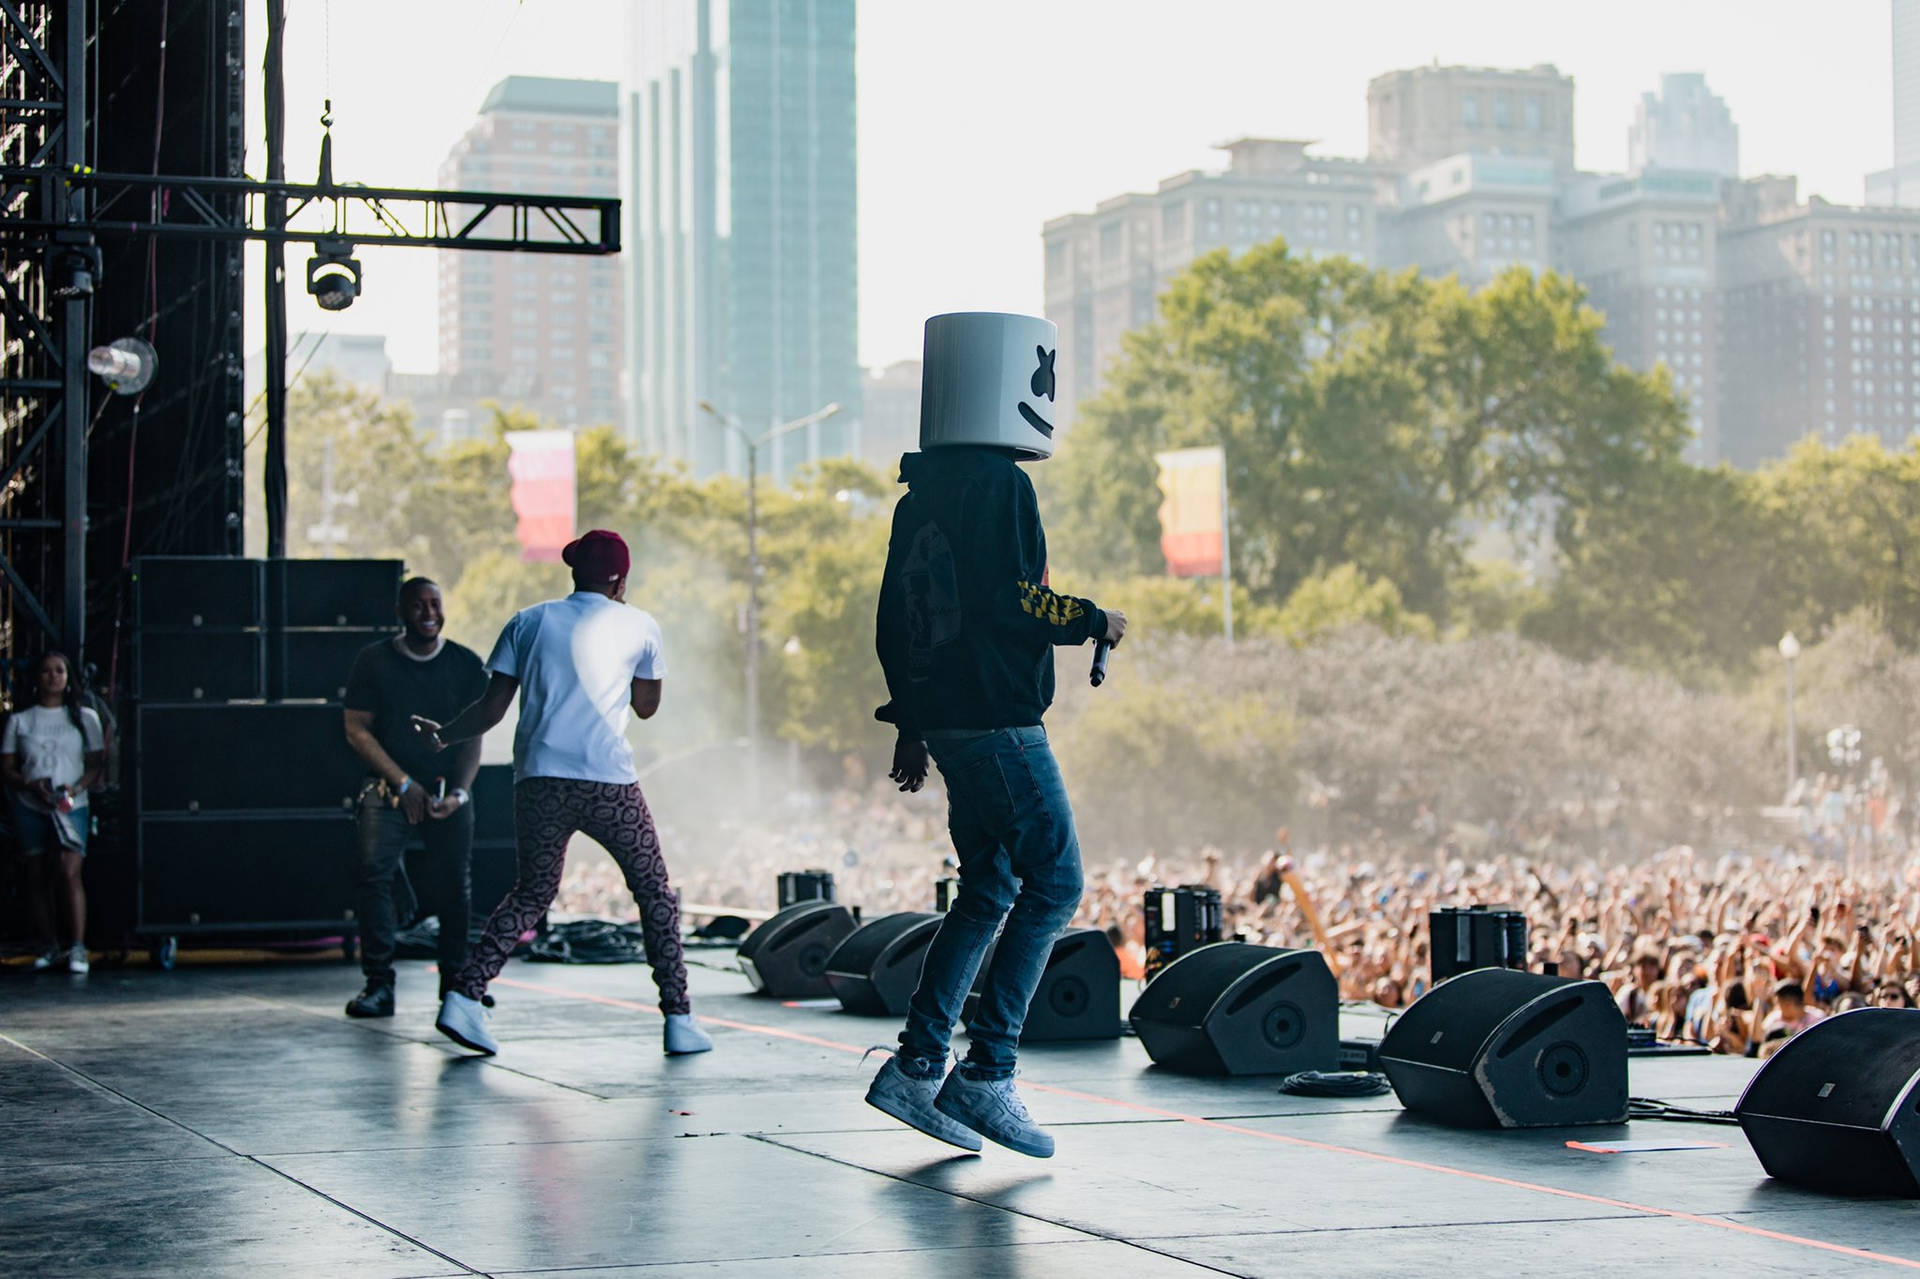 Marshmello Lights Up The Stage At Lollapalooza Background